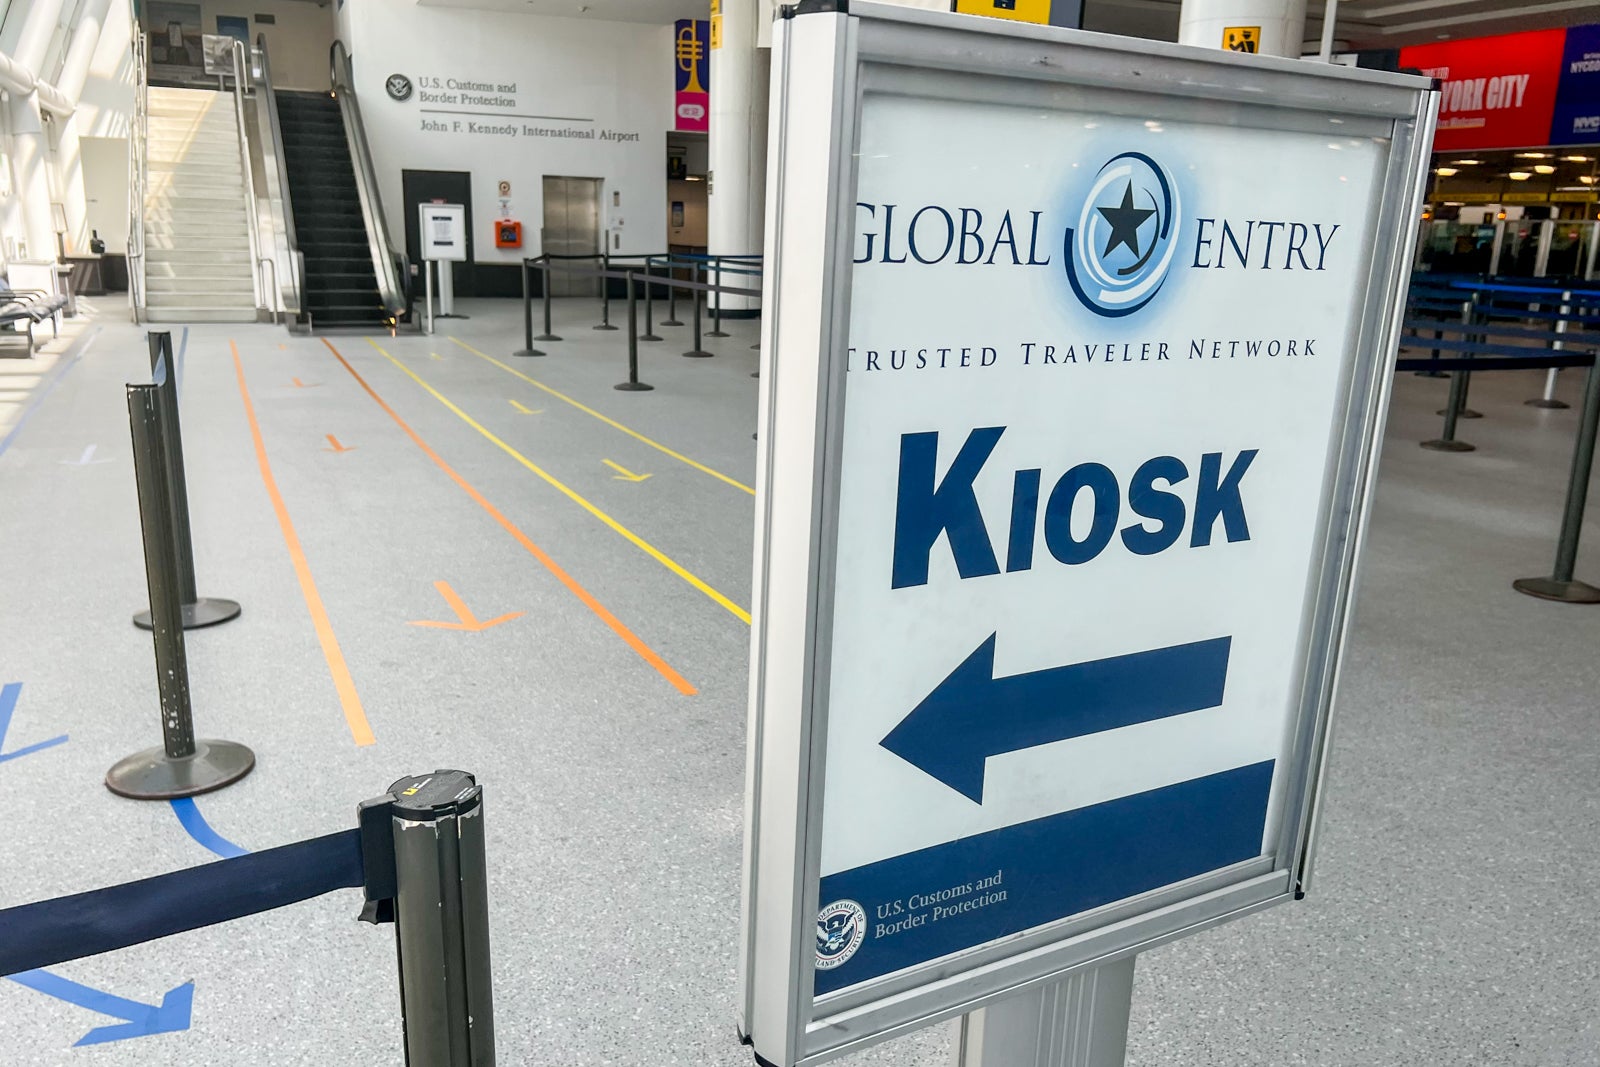 Skip The Line With Global Entry. Global Entry is a U.S. Customs